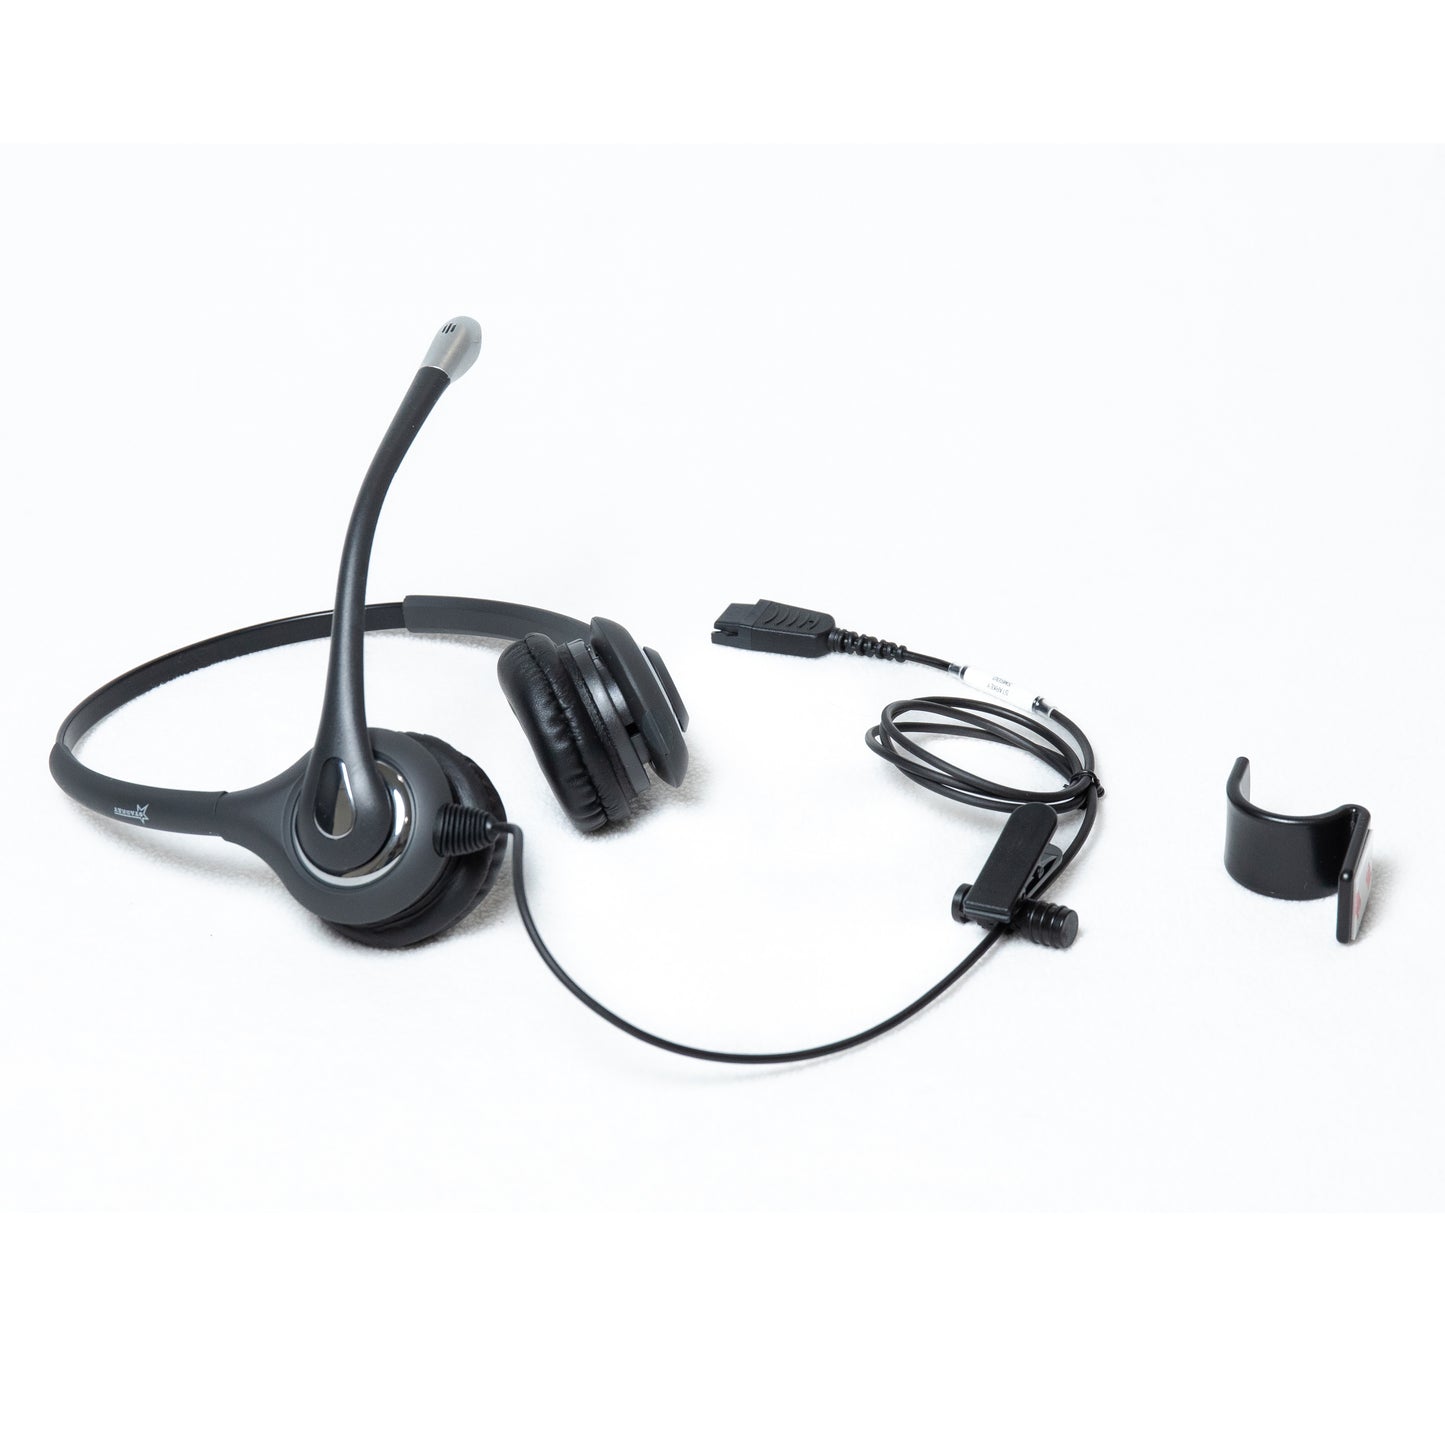 Starkey SM600-NC Military Headset with Passive Noise Canceling Mic (Cord sold separately.)